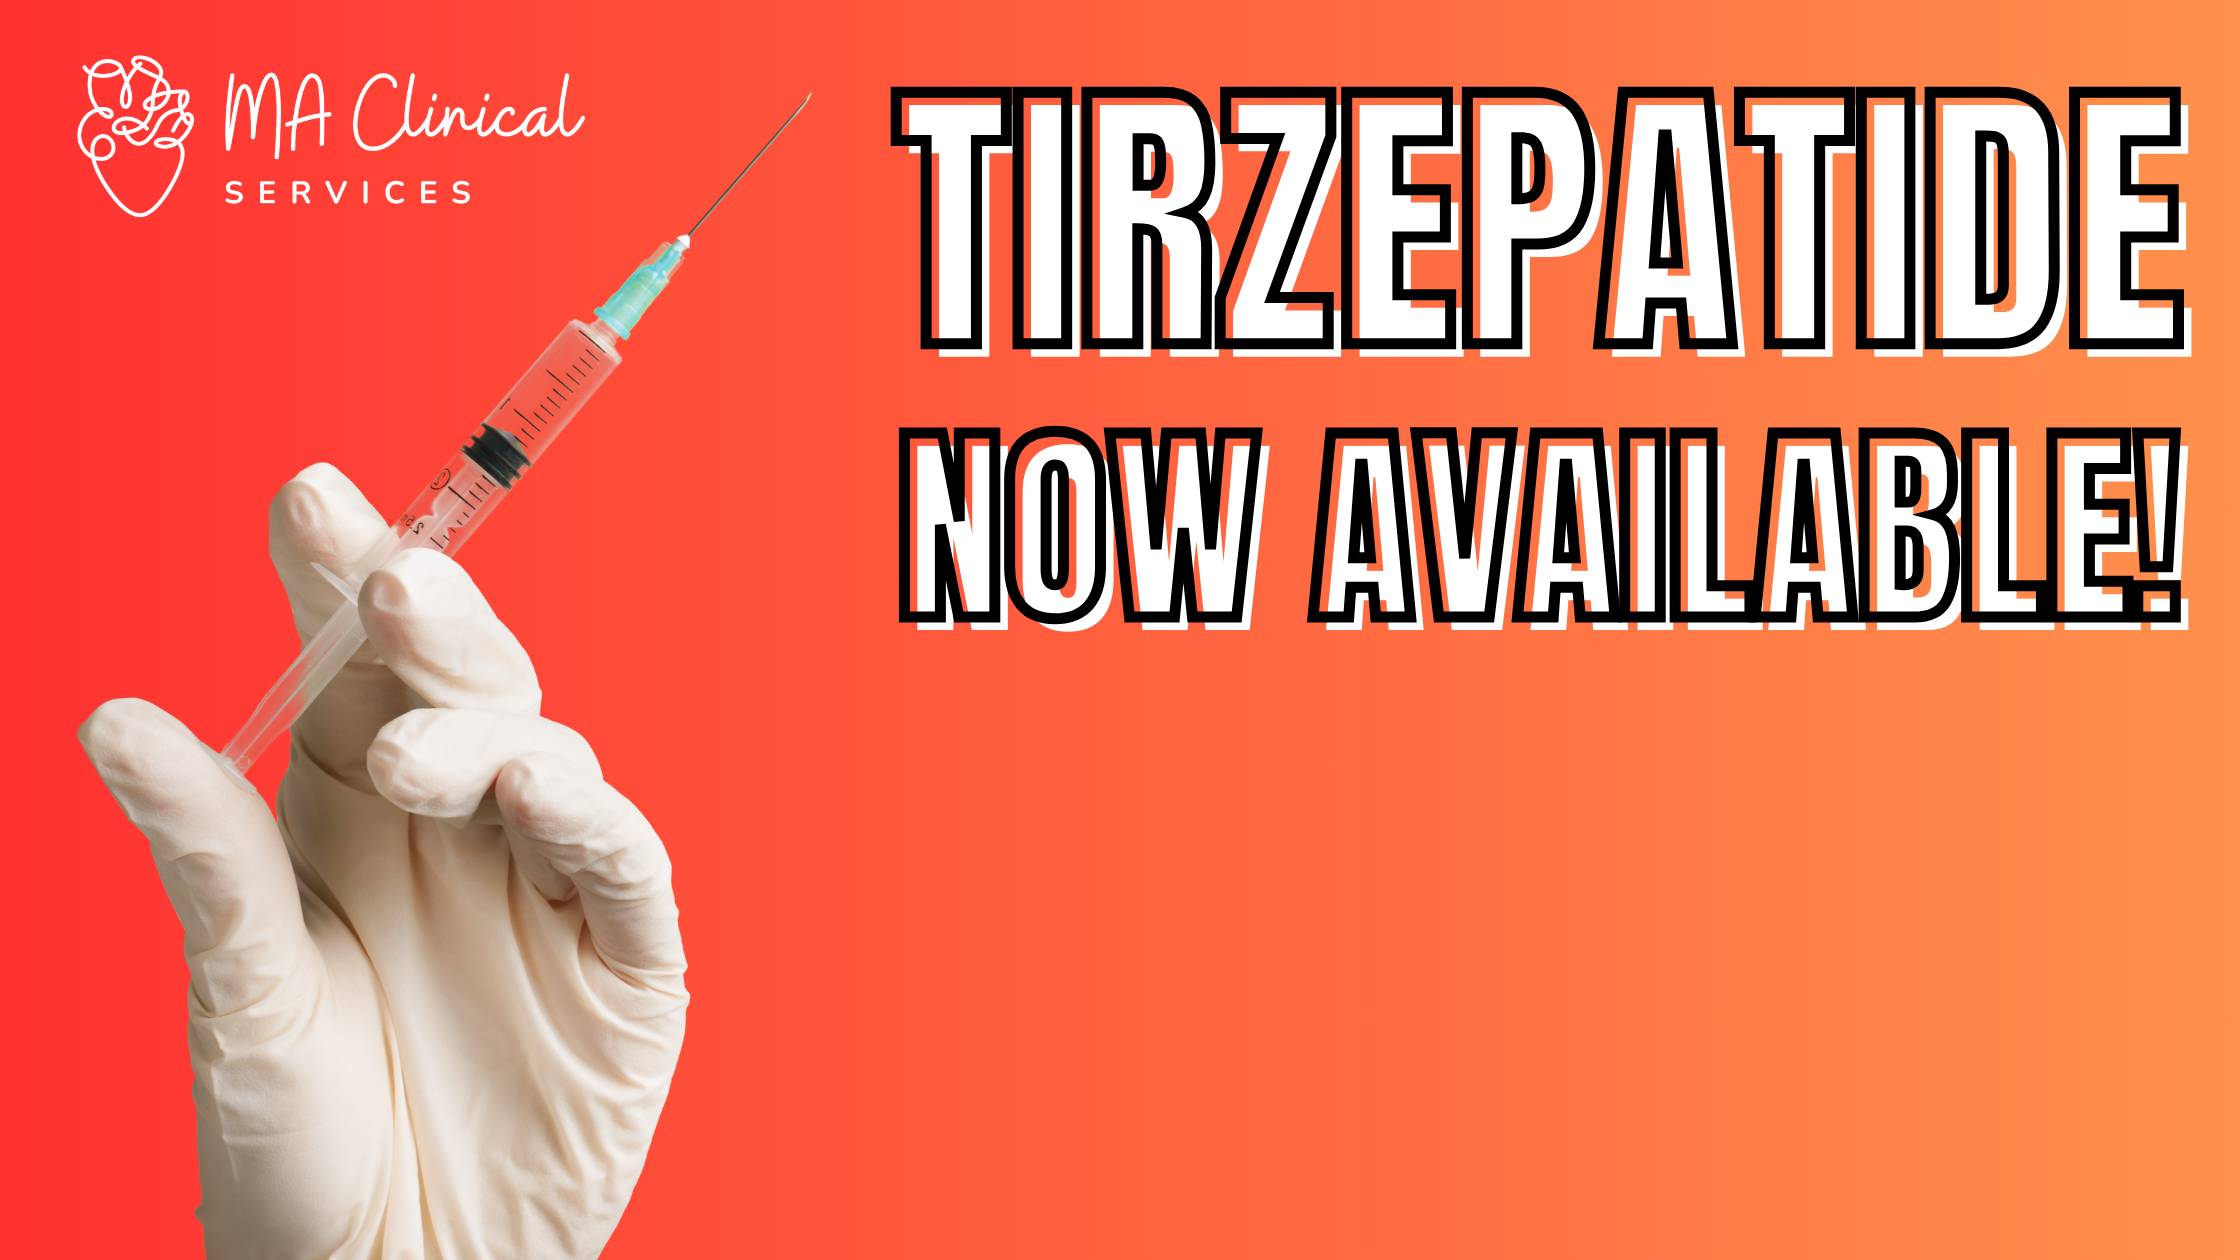 Tirzepatide Now Available